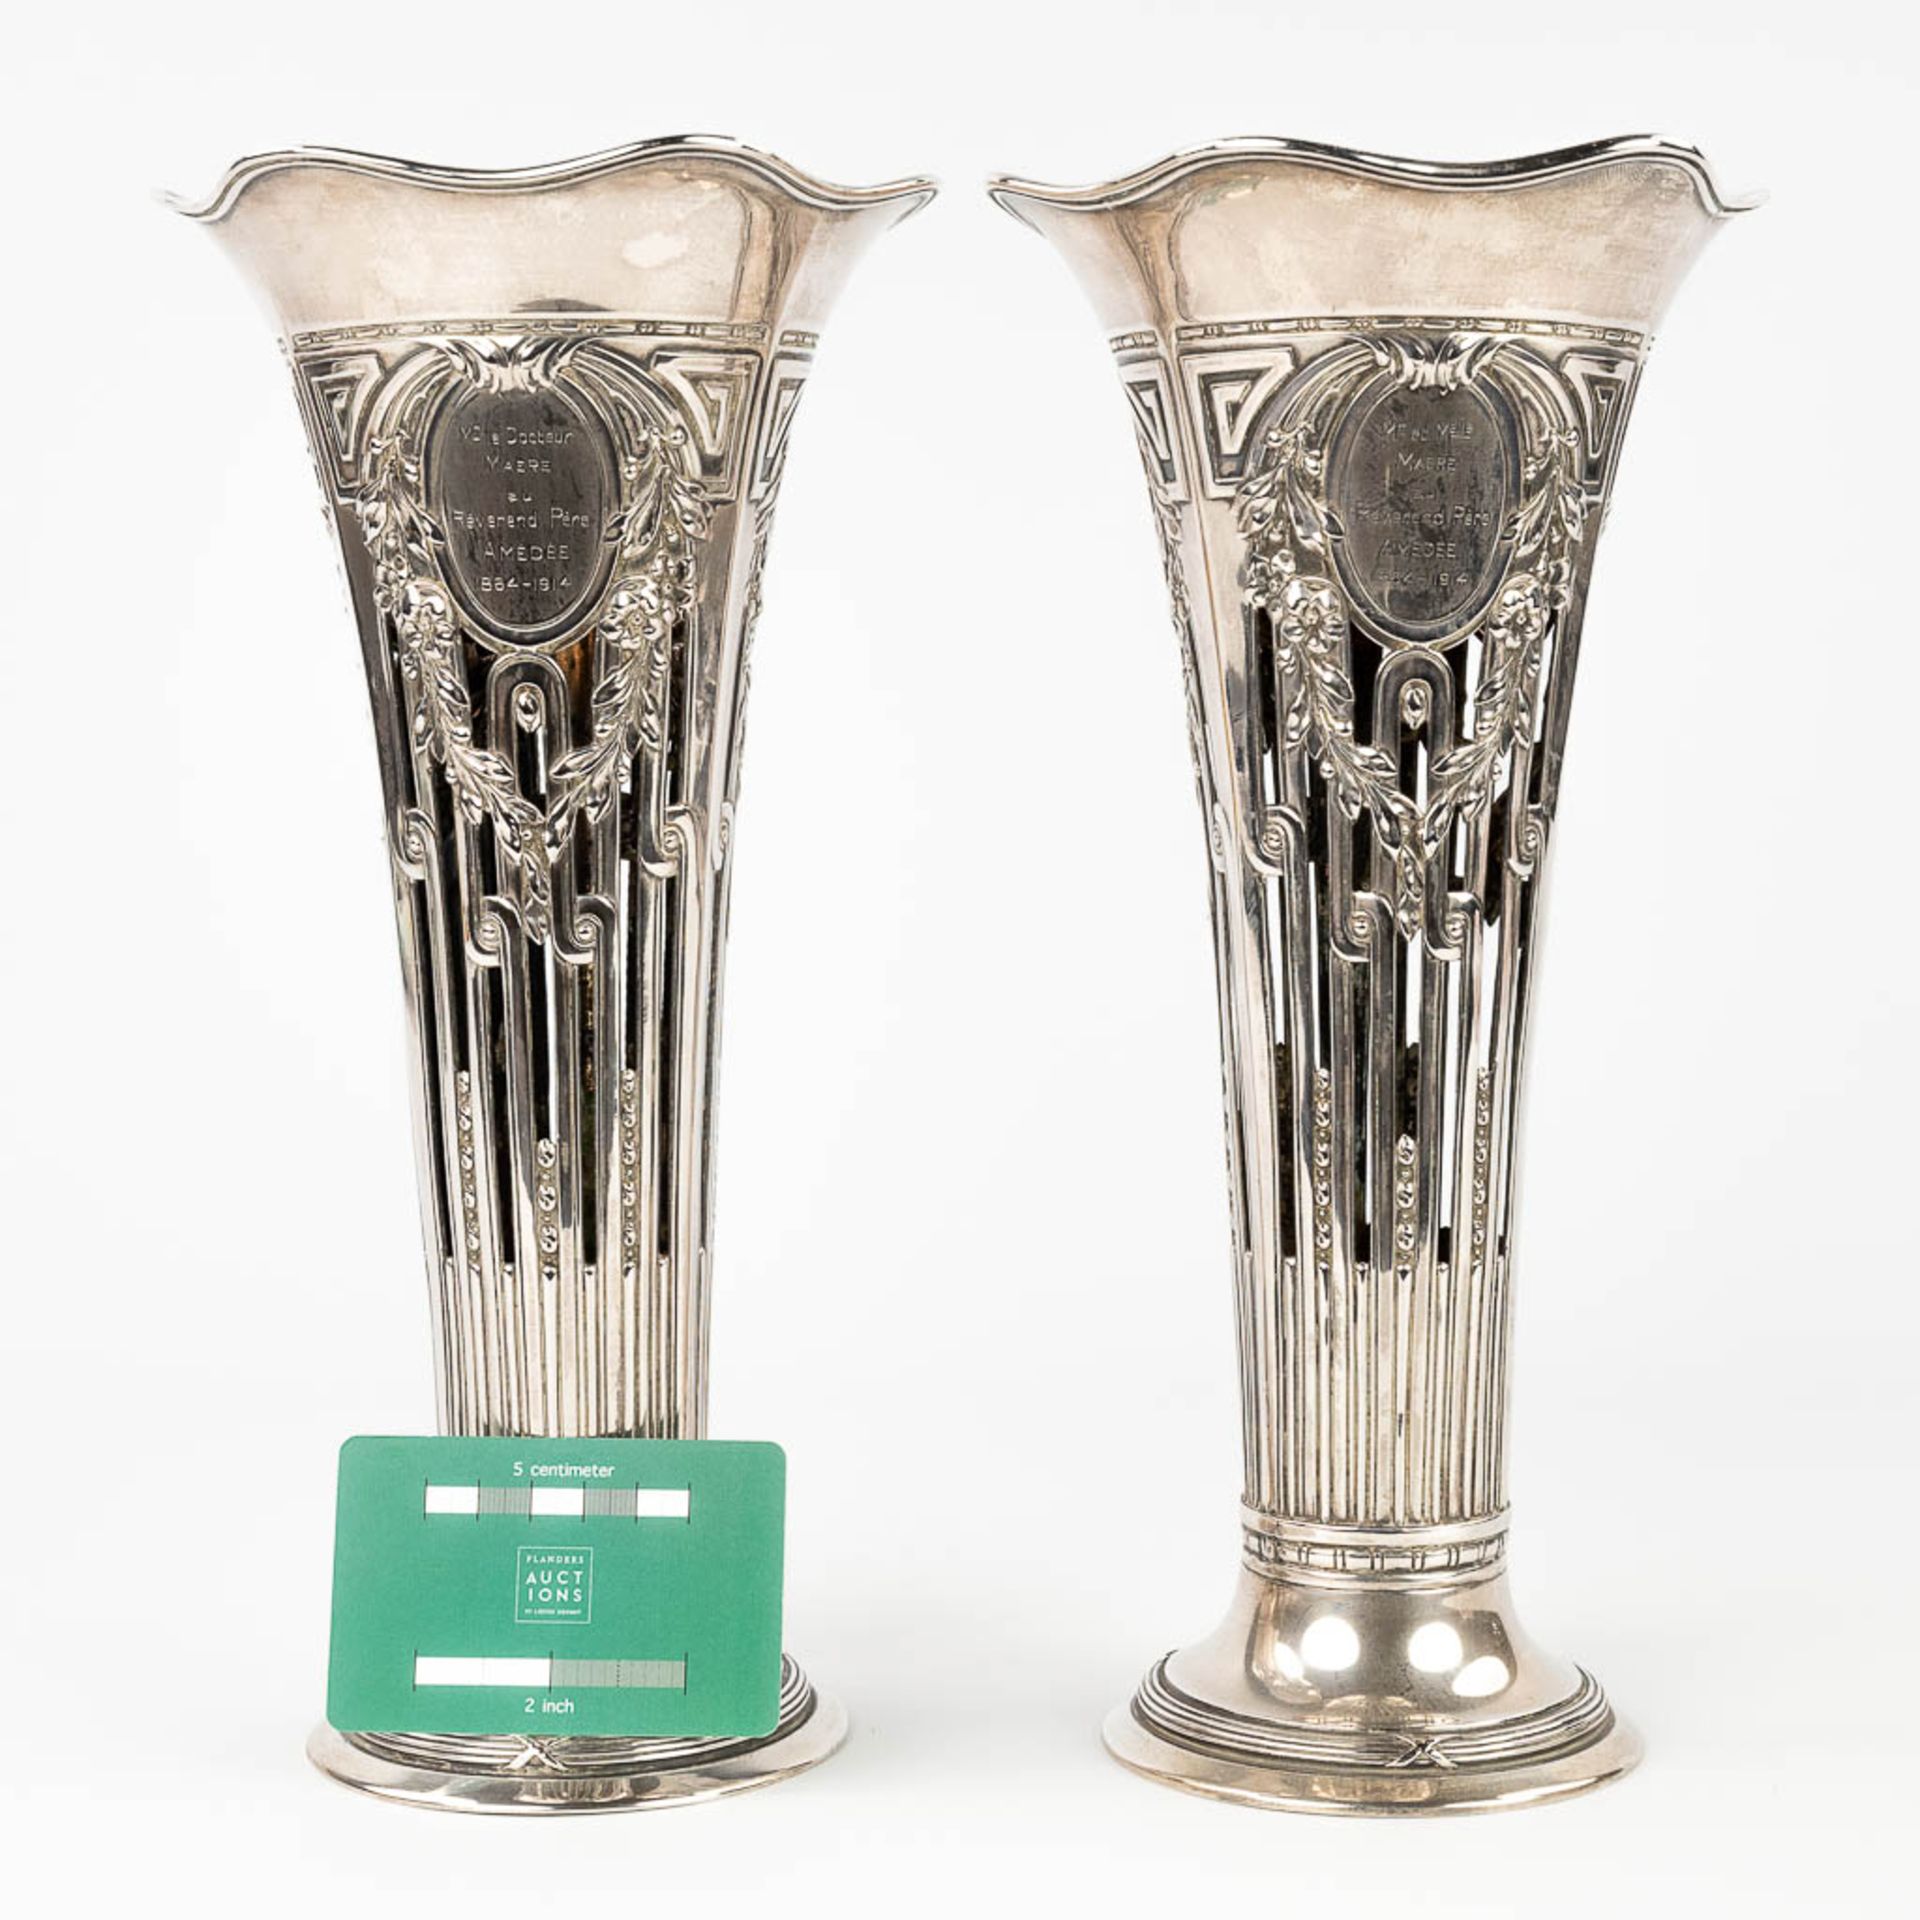 A pair of vases made of silver and marked 800. Made in Germany. 693g. 20th C. (H:31 x D:15,5 cm) - Image 2 of 14